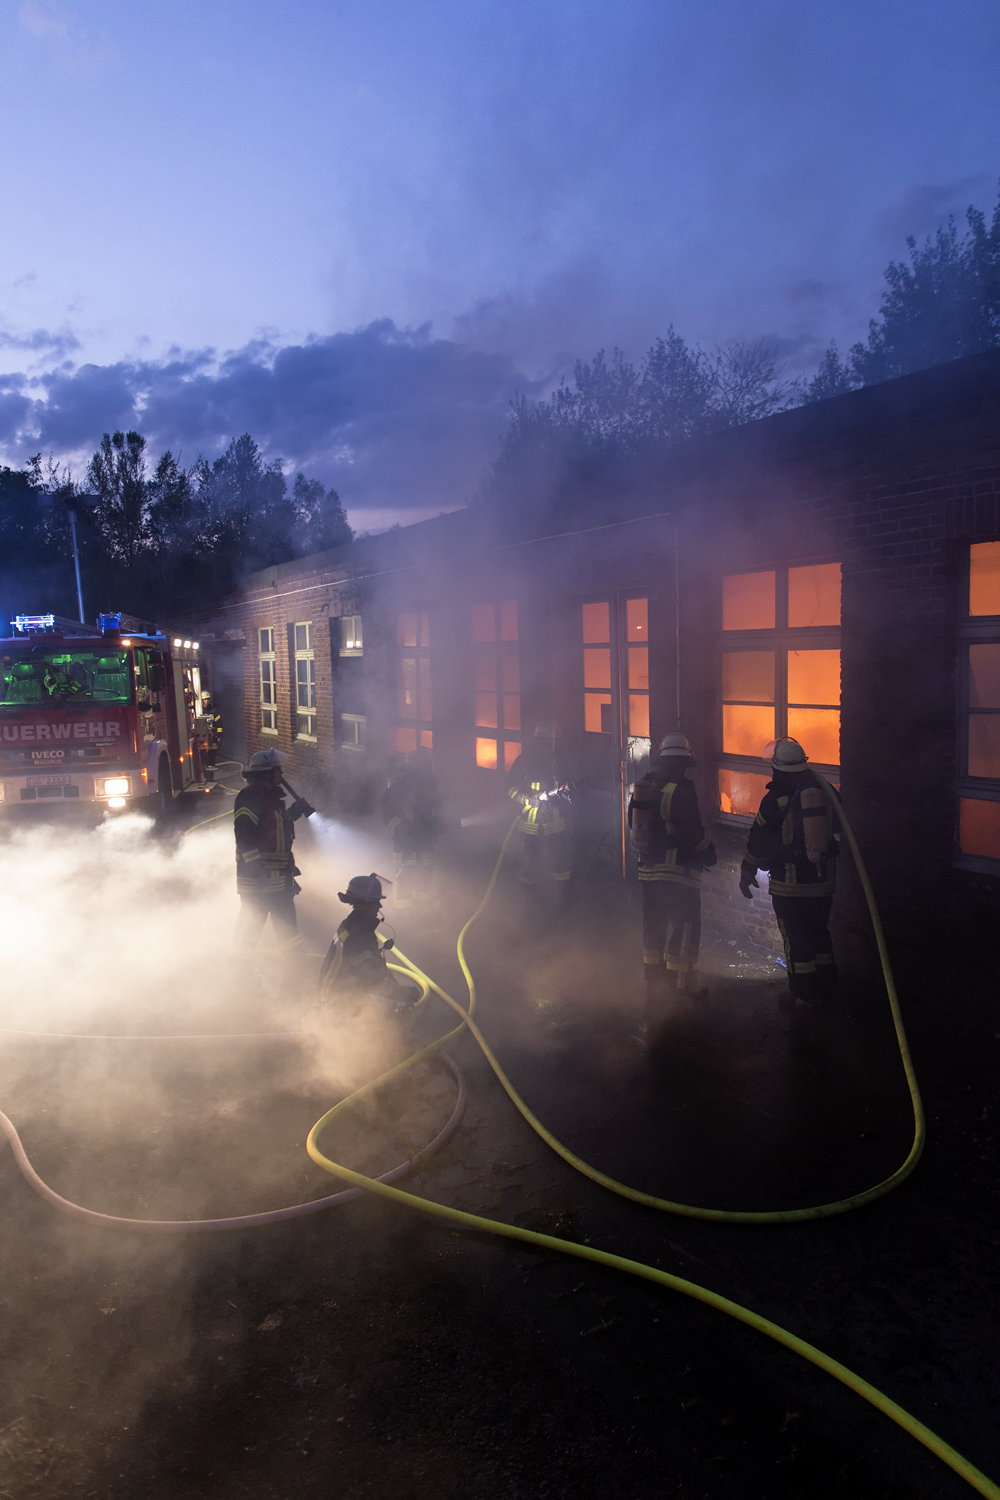 Firefighters with flashlights